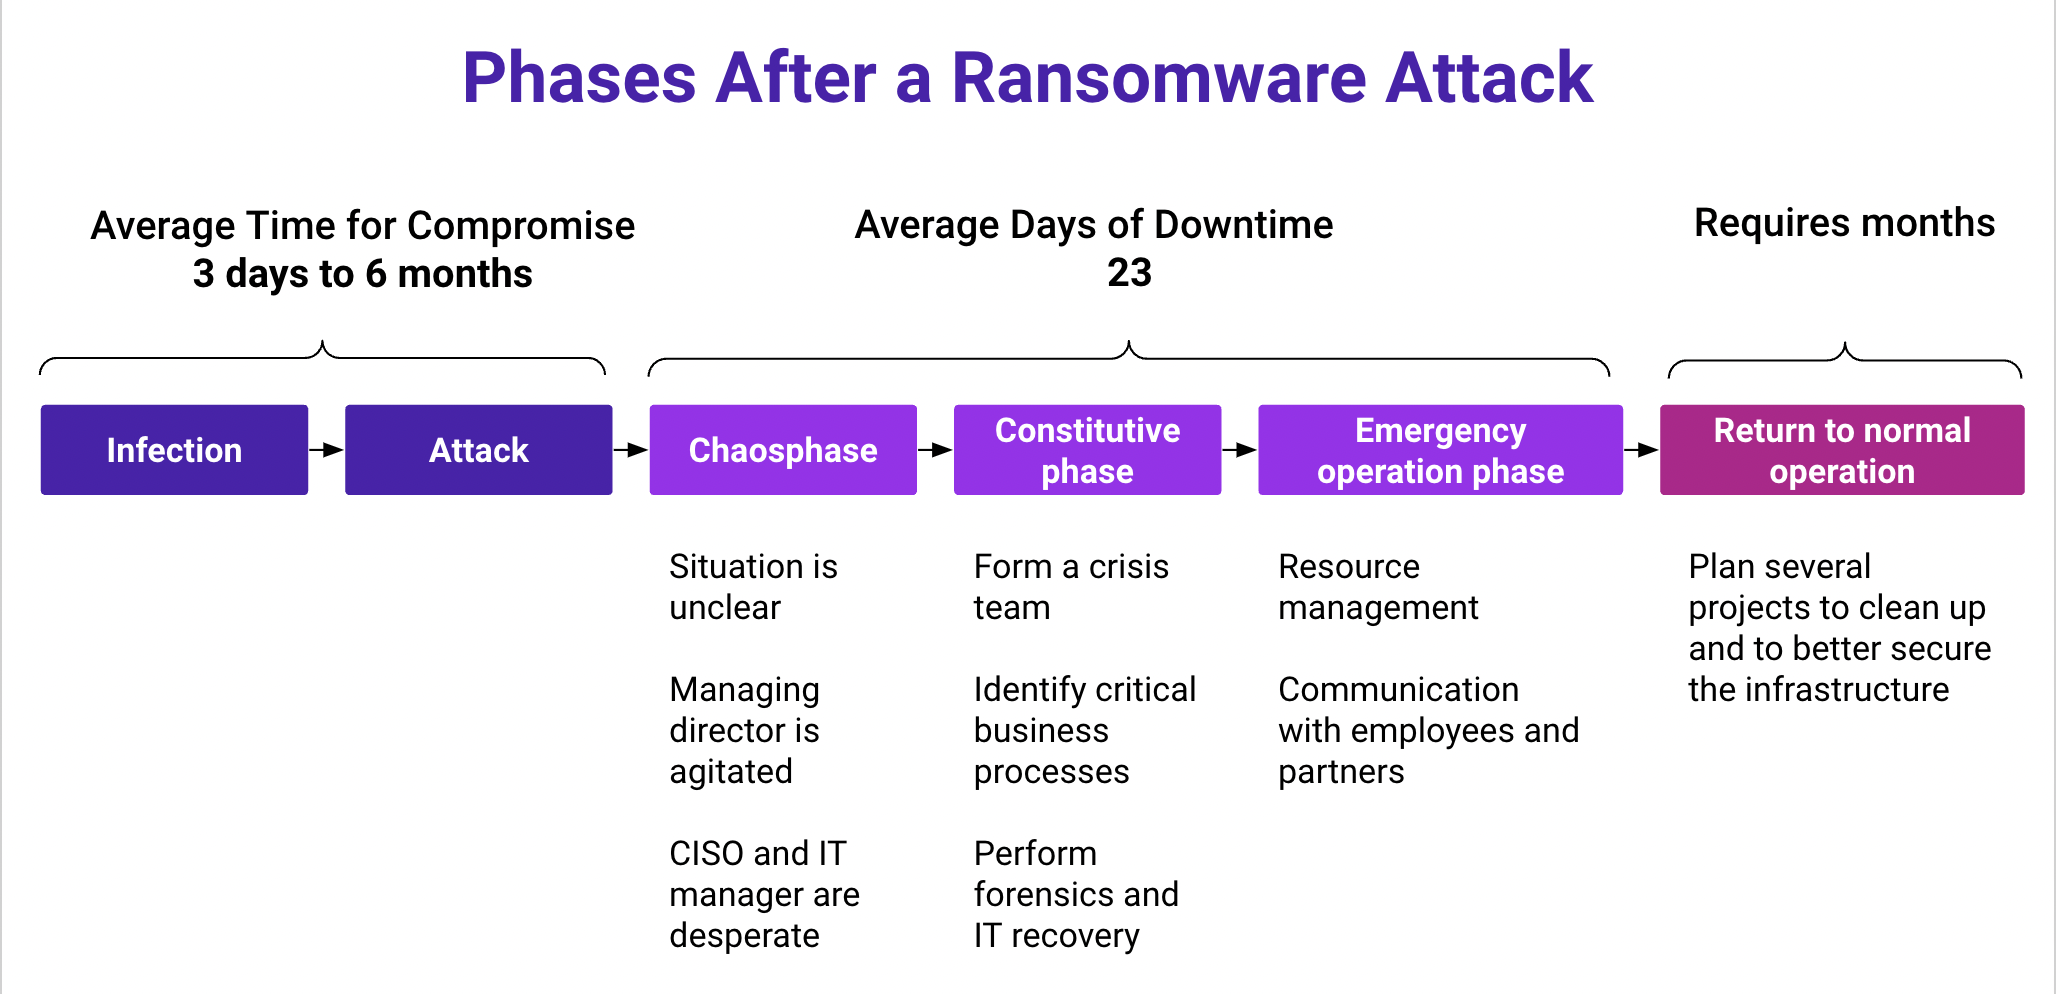 Phases after a ransomware attack